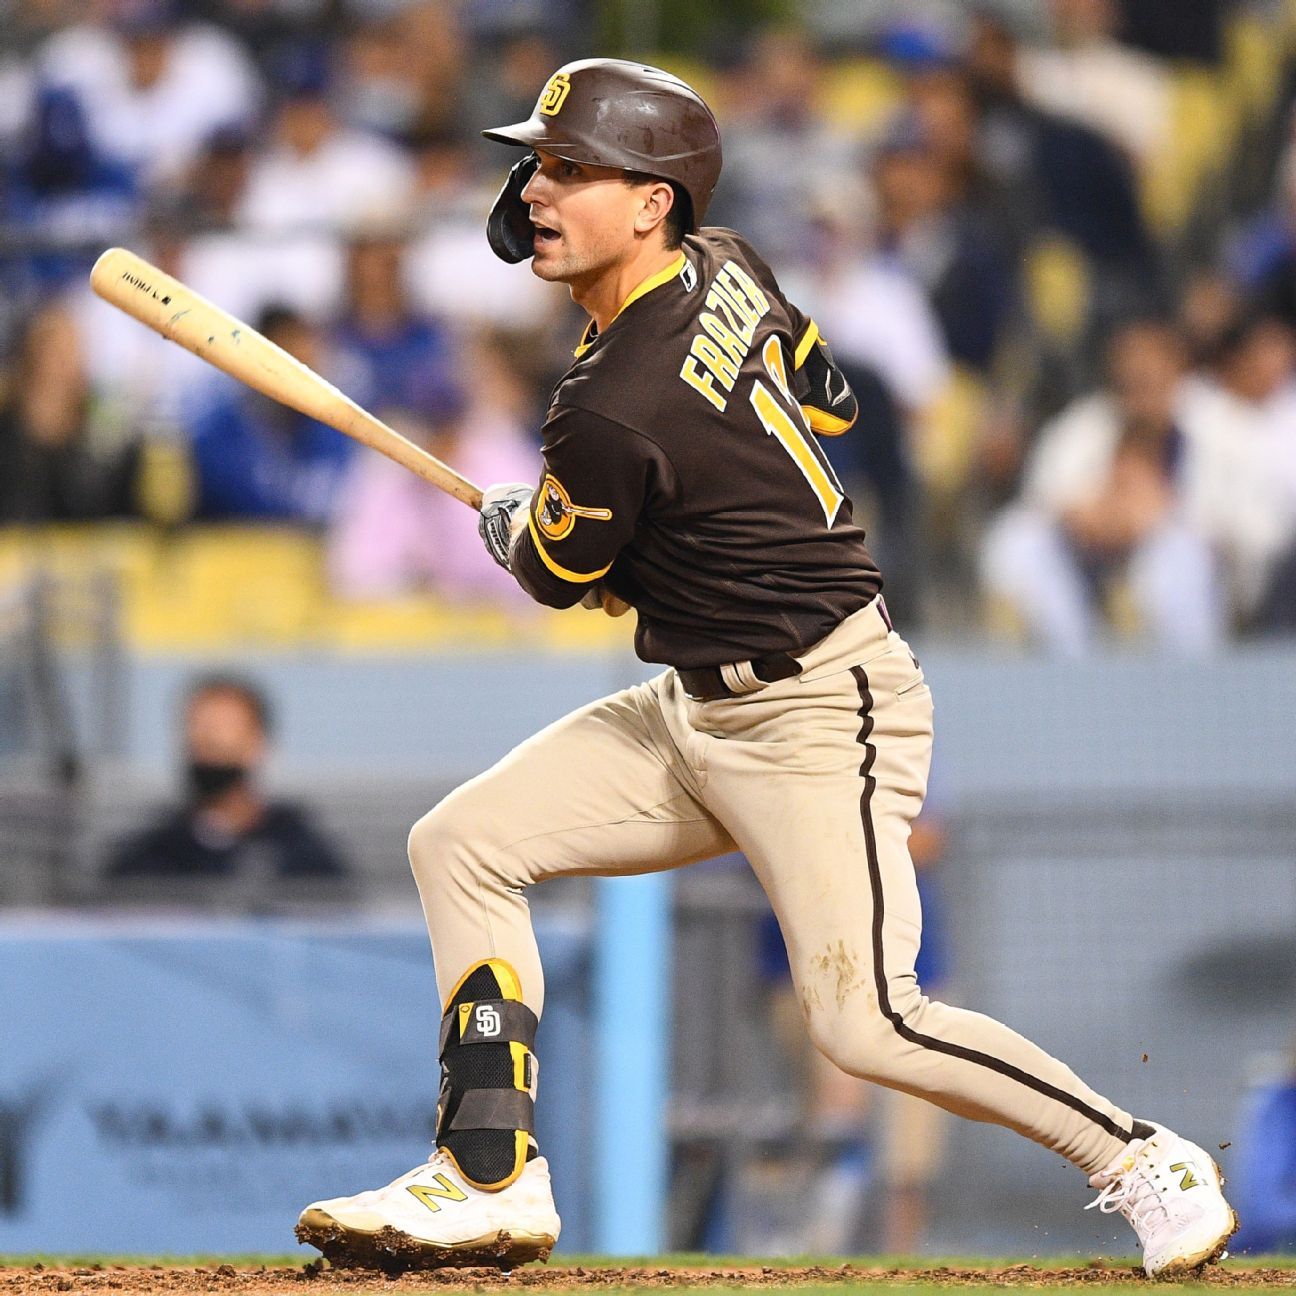 MLB Rookie Report: Adam Frazier, INF, Pittsburgh Pirates - Minor League Ball